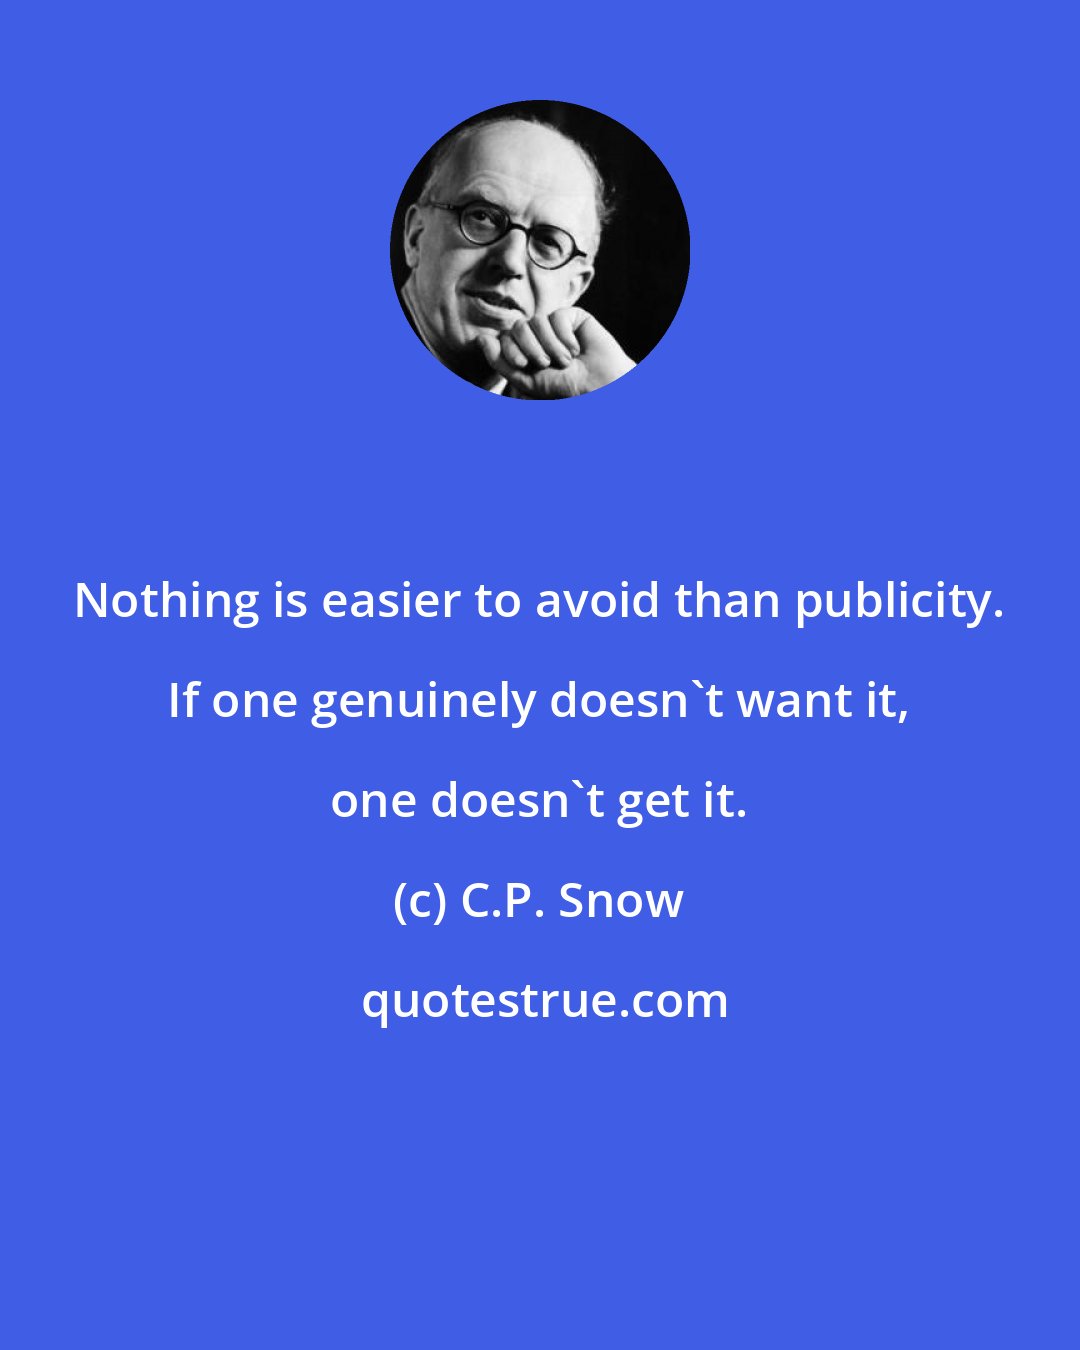 C.P. Snow: Nothing is easier to avoid than publicity. If one genuinely doesn't want it, one doesn't get it.